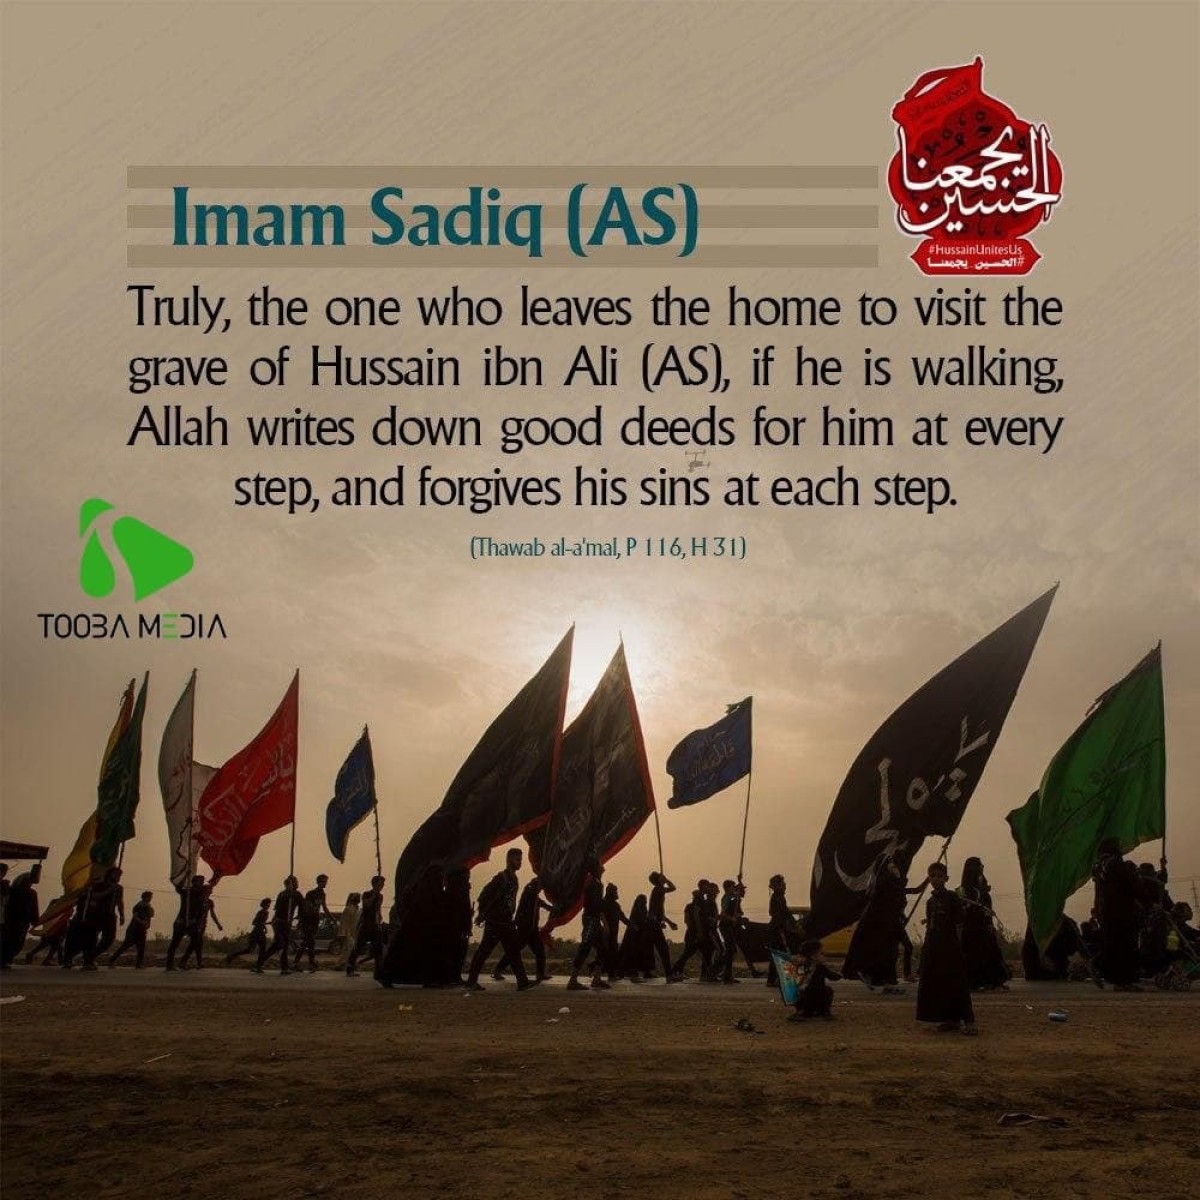 Truly, the one who leaves the home to visit the grave of Hussain ibn Ali (AS)